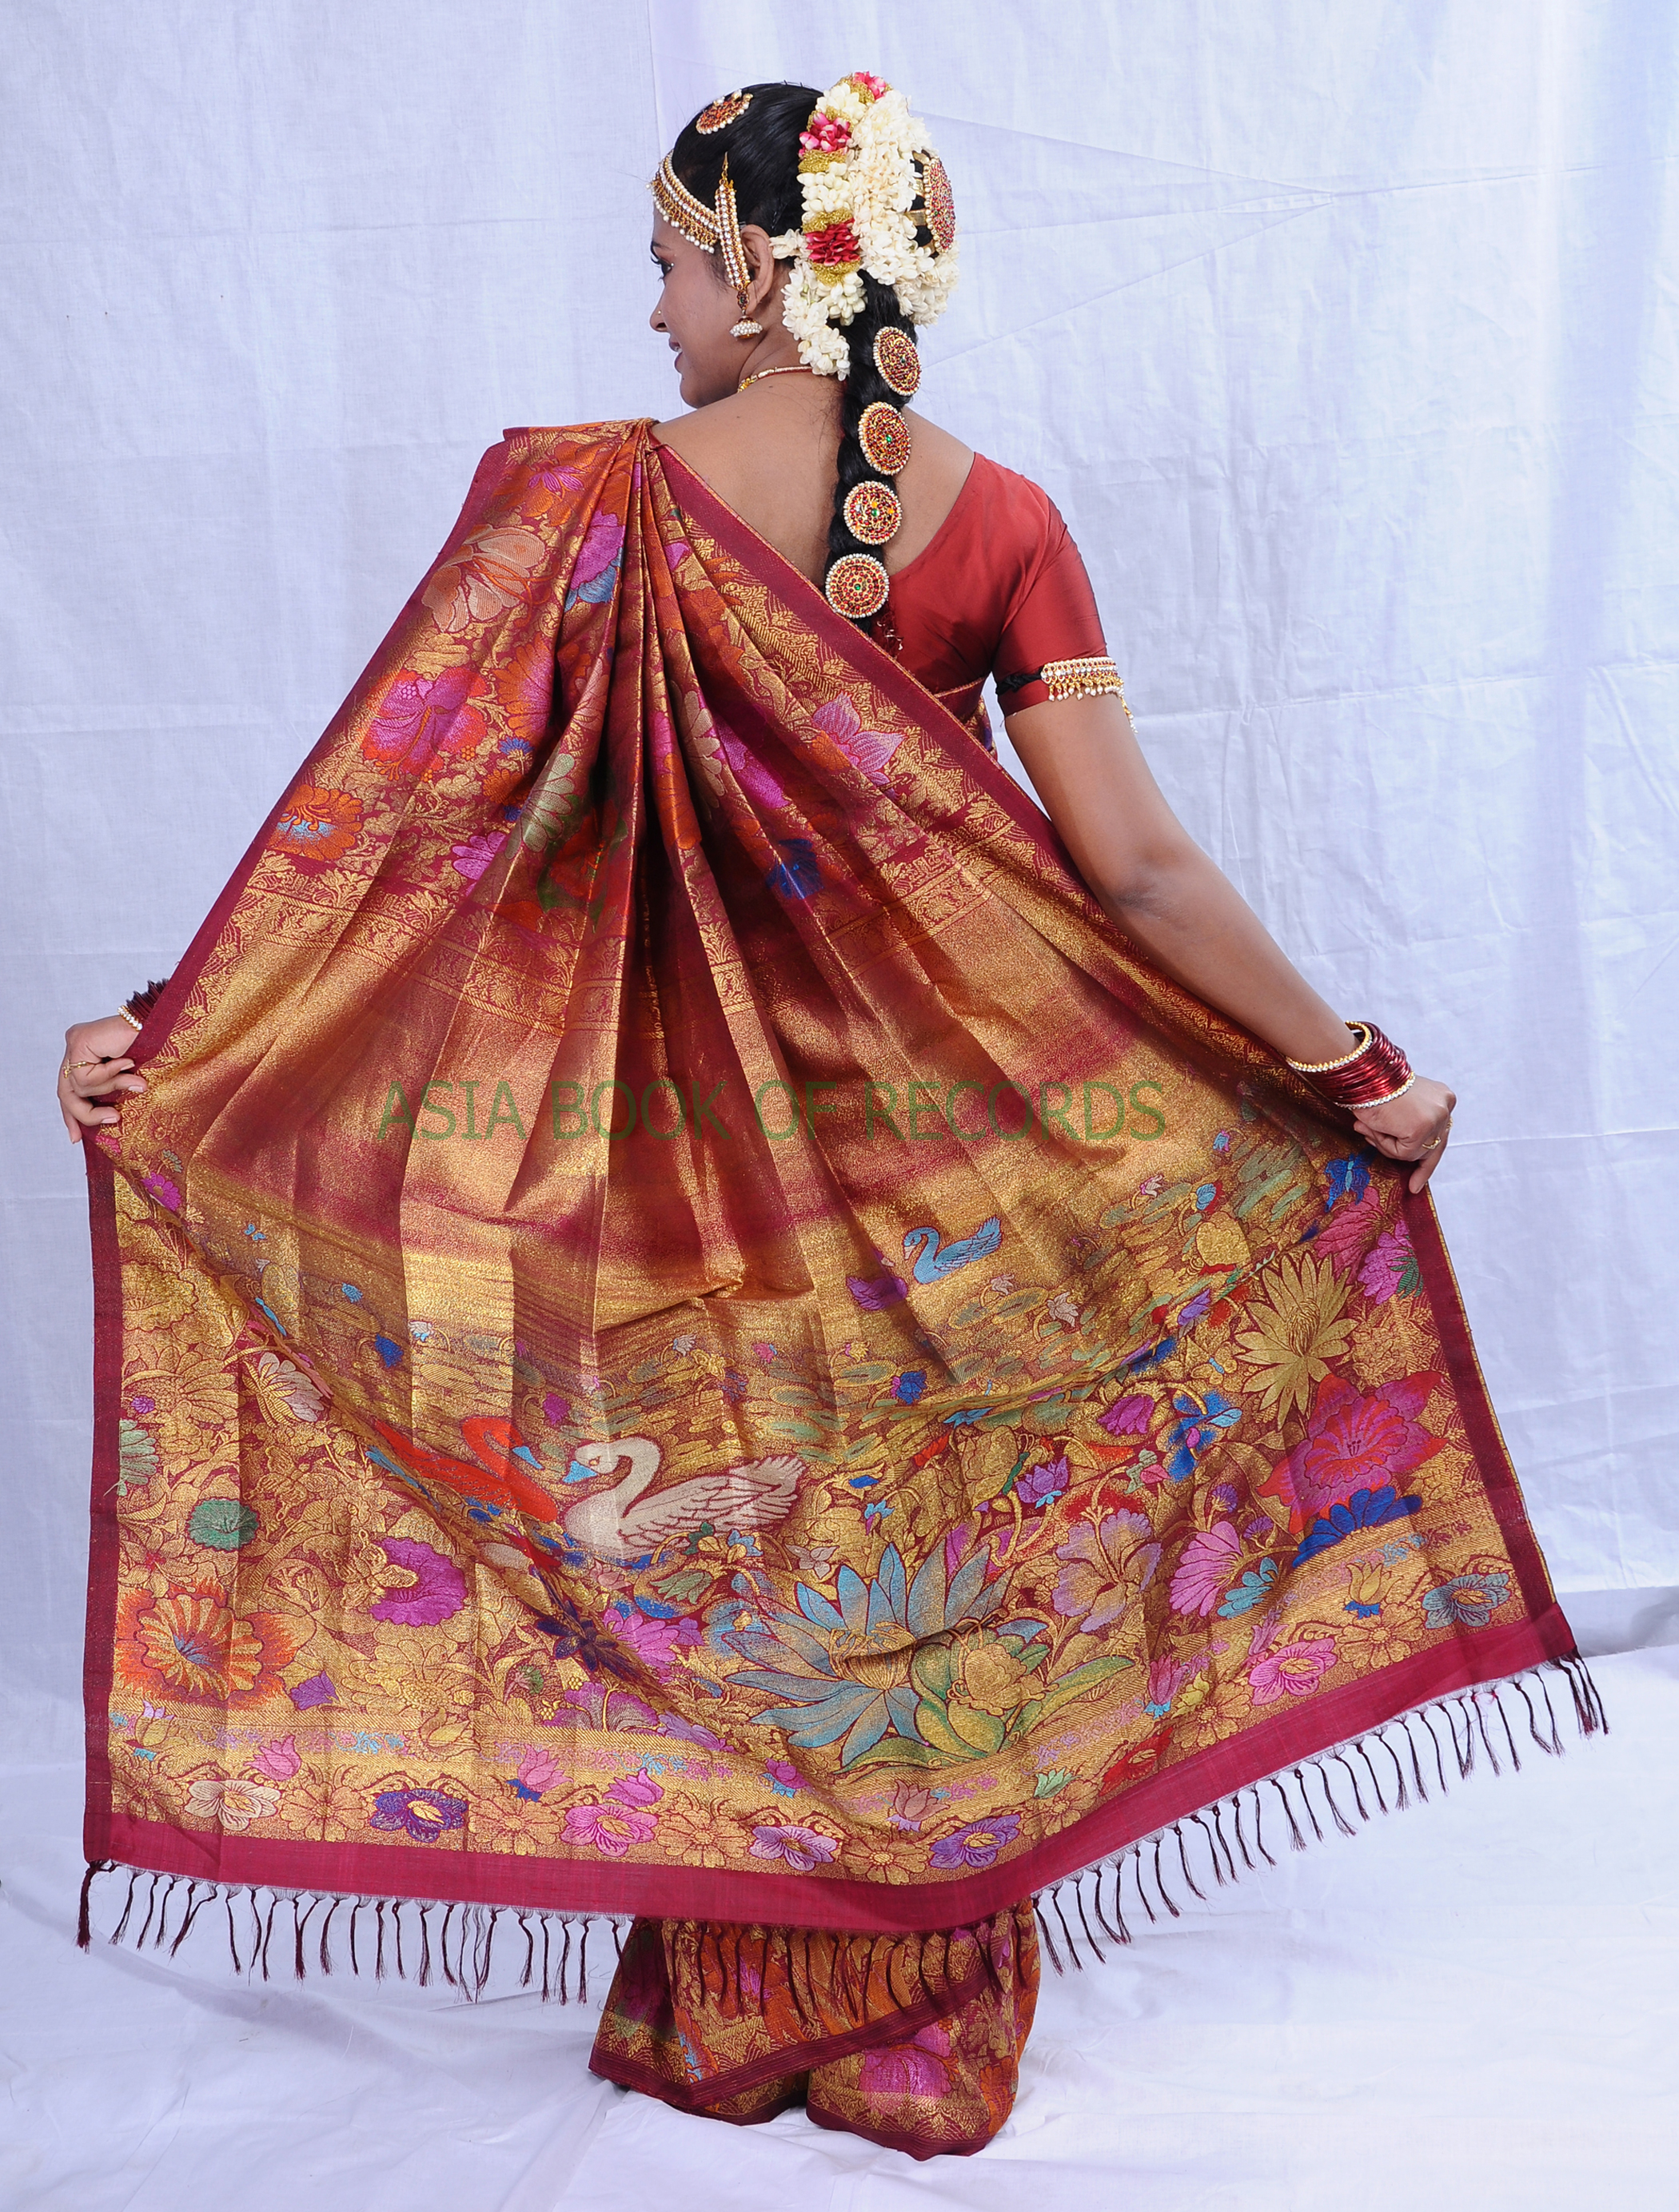 SARI CREATED WITH MOST NUMBER OF HOOKS AND DESIGN CARDS